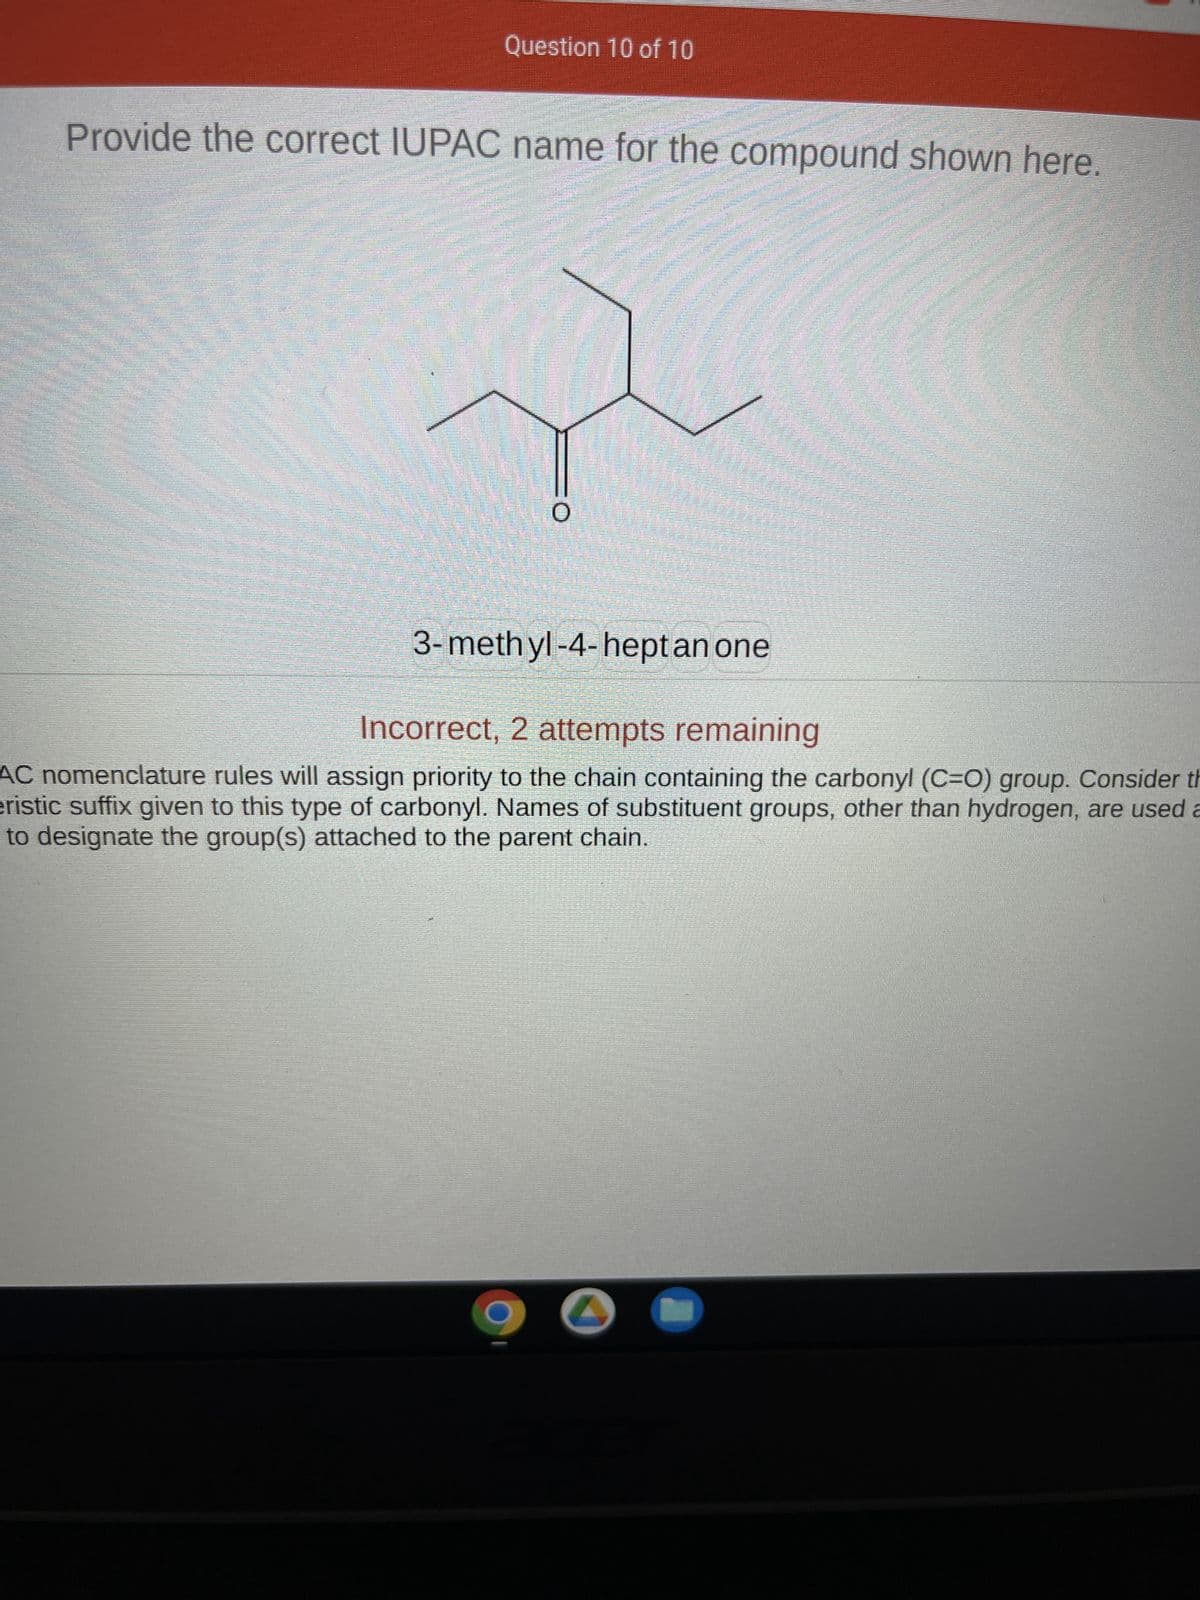 Question 10 of 10
Provide the correct IUPAC name for the compound shown here.
**************
3-methyl-4-heptan one
Incorrect, 2 attempts remaining
AC nomenclature rules will assign priority to the chain containing the carbonyl (C=O) group. Consider th
eristic suffix given to this type of carbonyl. Names of substituent groups, other than hydrogen, are used a
to designate the group(s) attached to the parent chain.